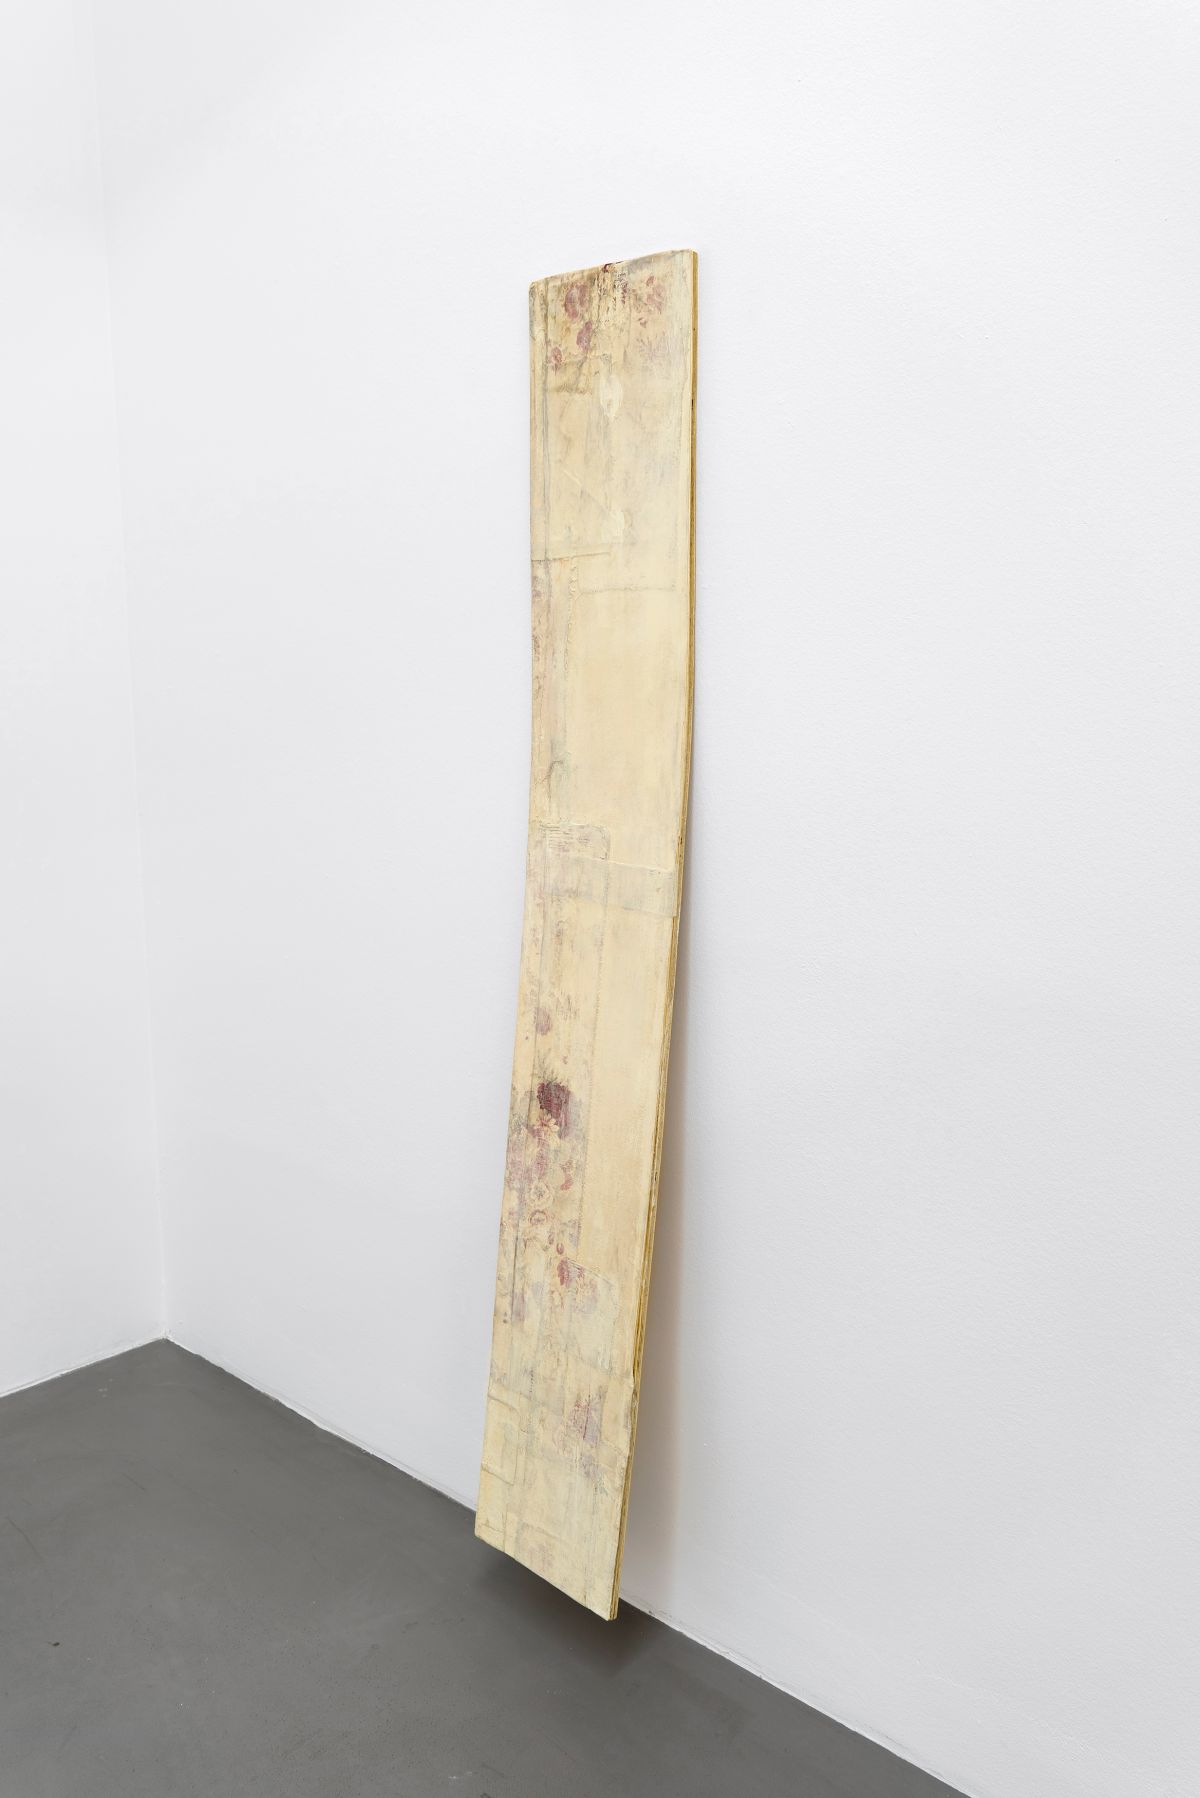 Lawrence Carroll, ‘Untitled (slide painting)’, 2013, Oil, wax, fabric, canvas on wood